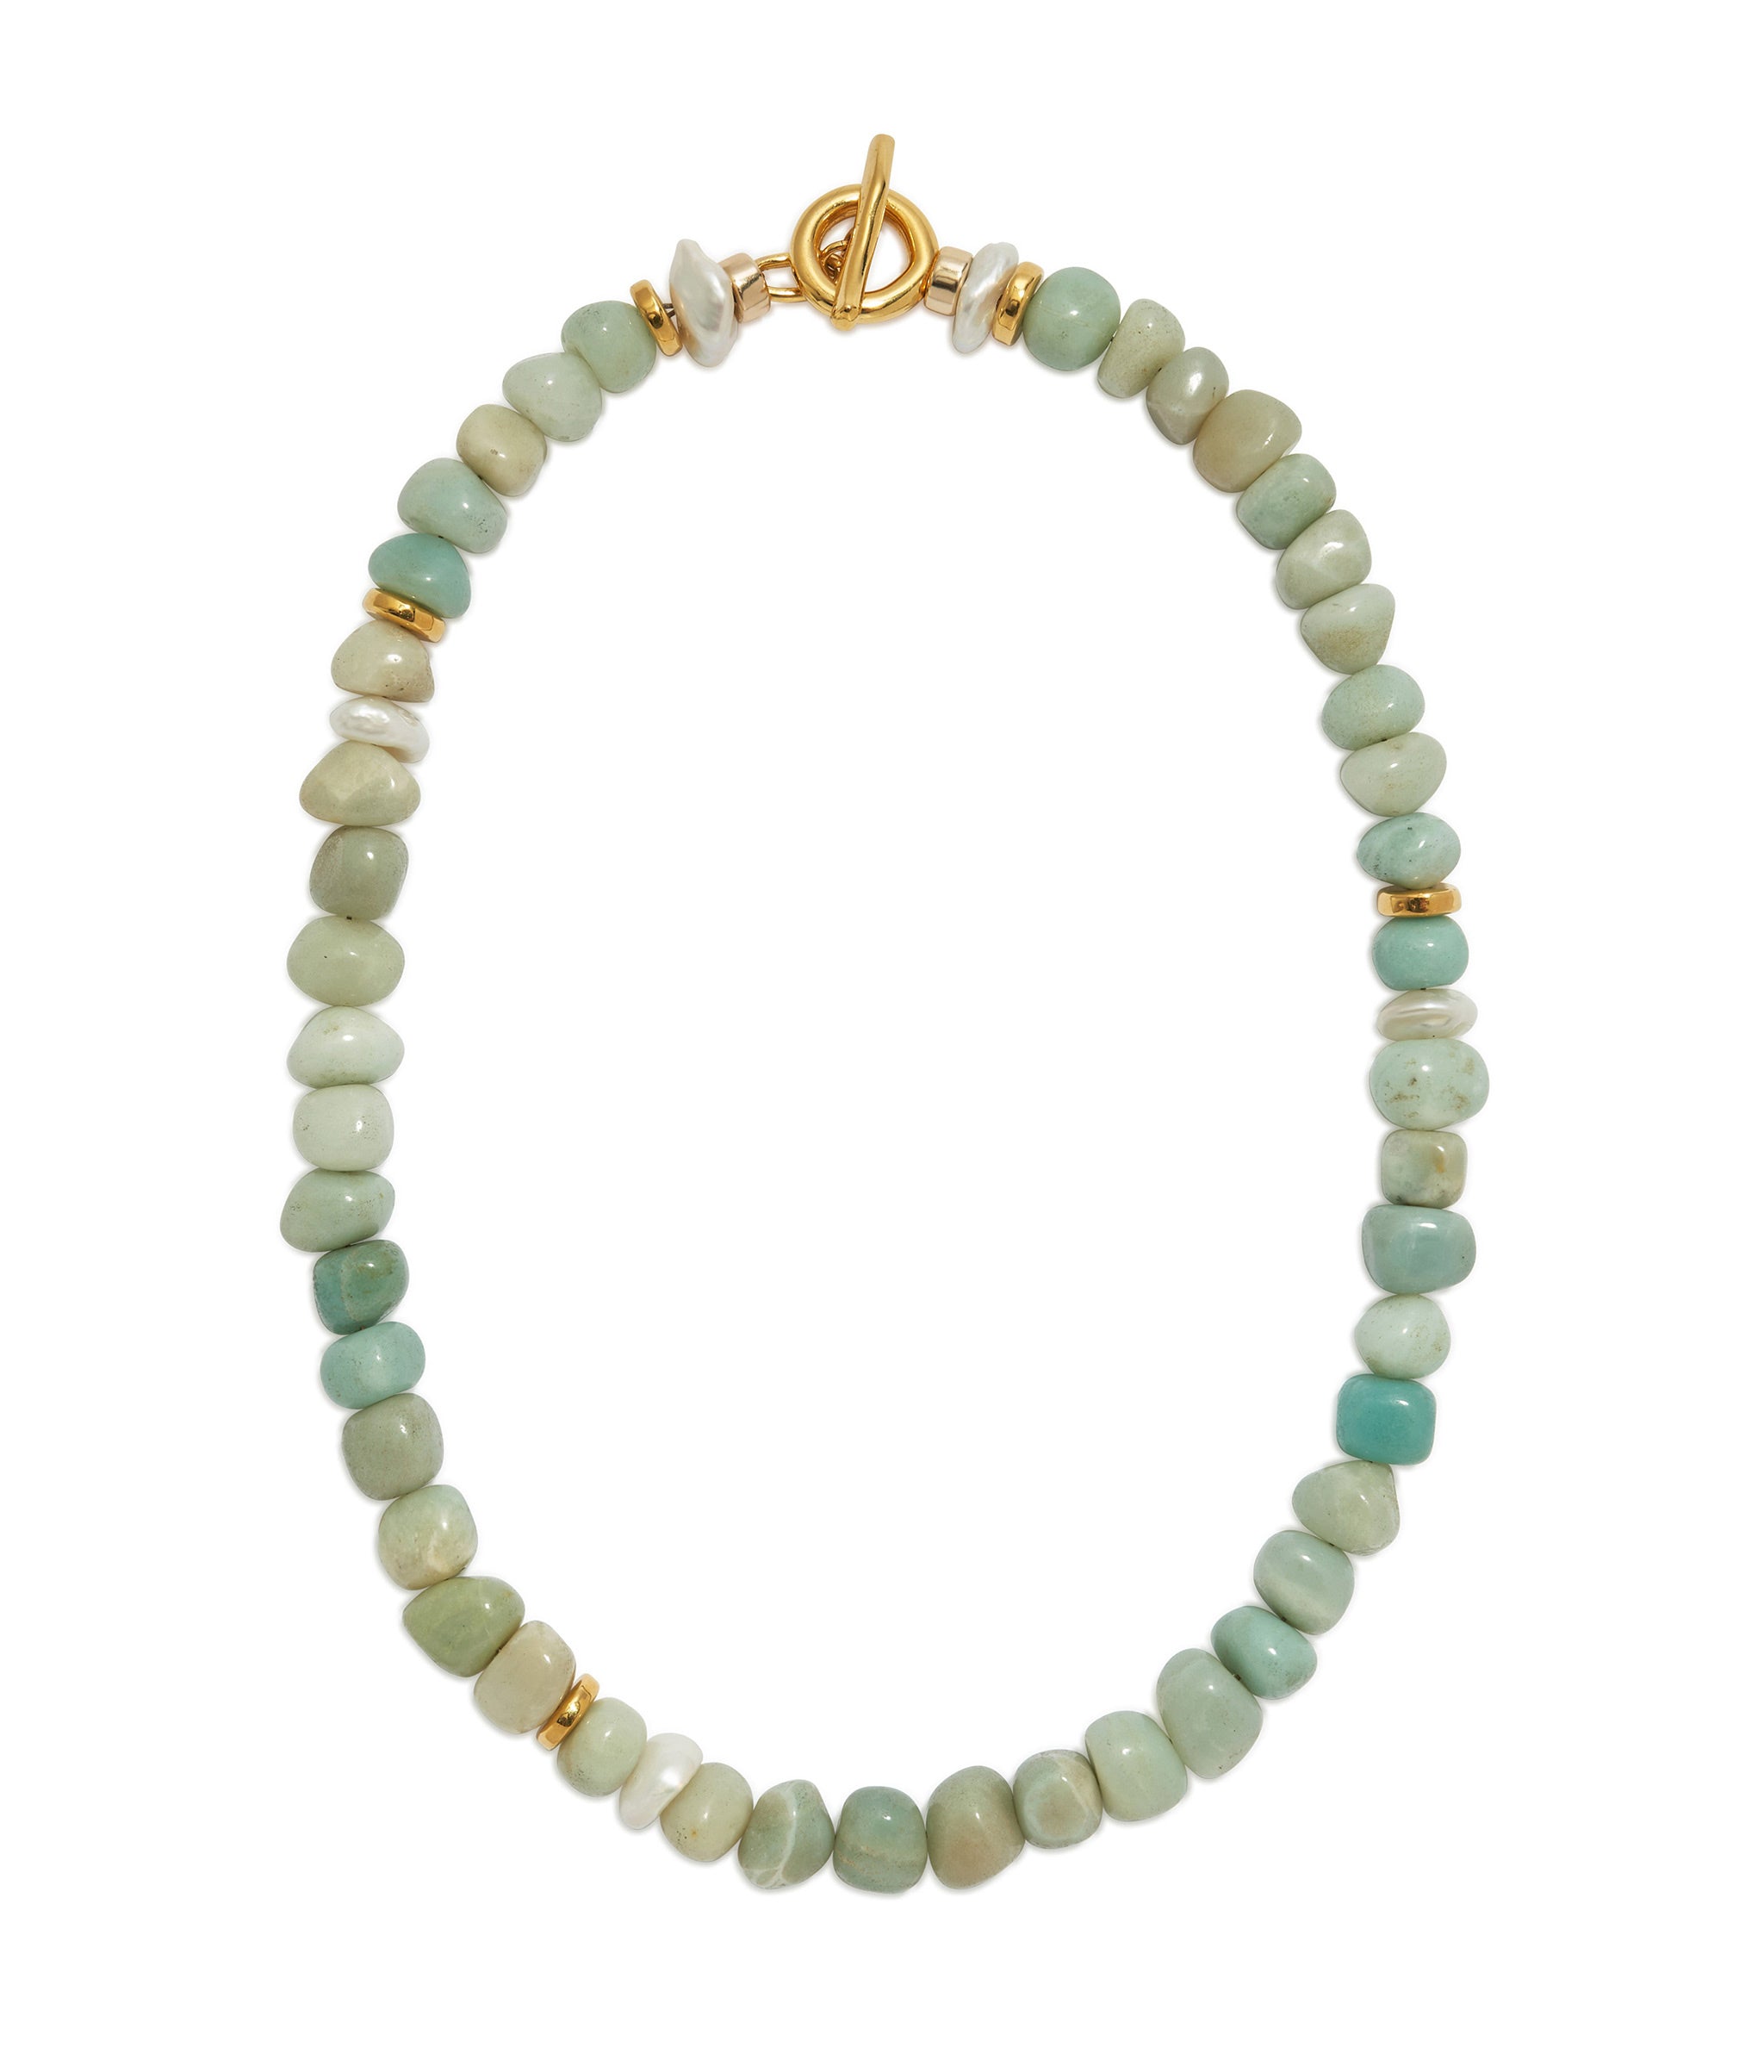 Mood Necklace in Amazonite. Single-strand of varying green amazonite beads with gold-plated brass toggle closure.